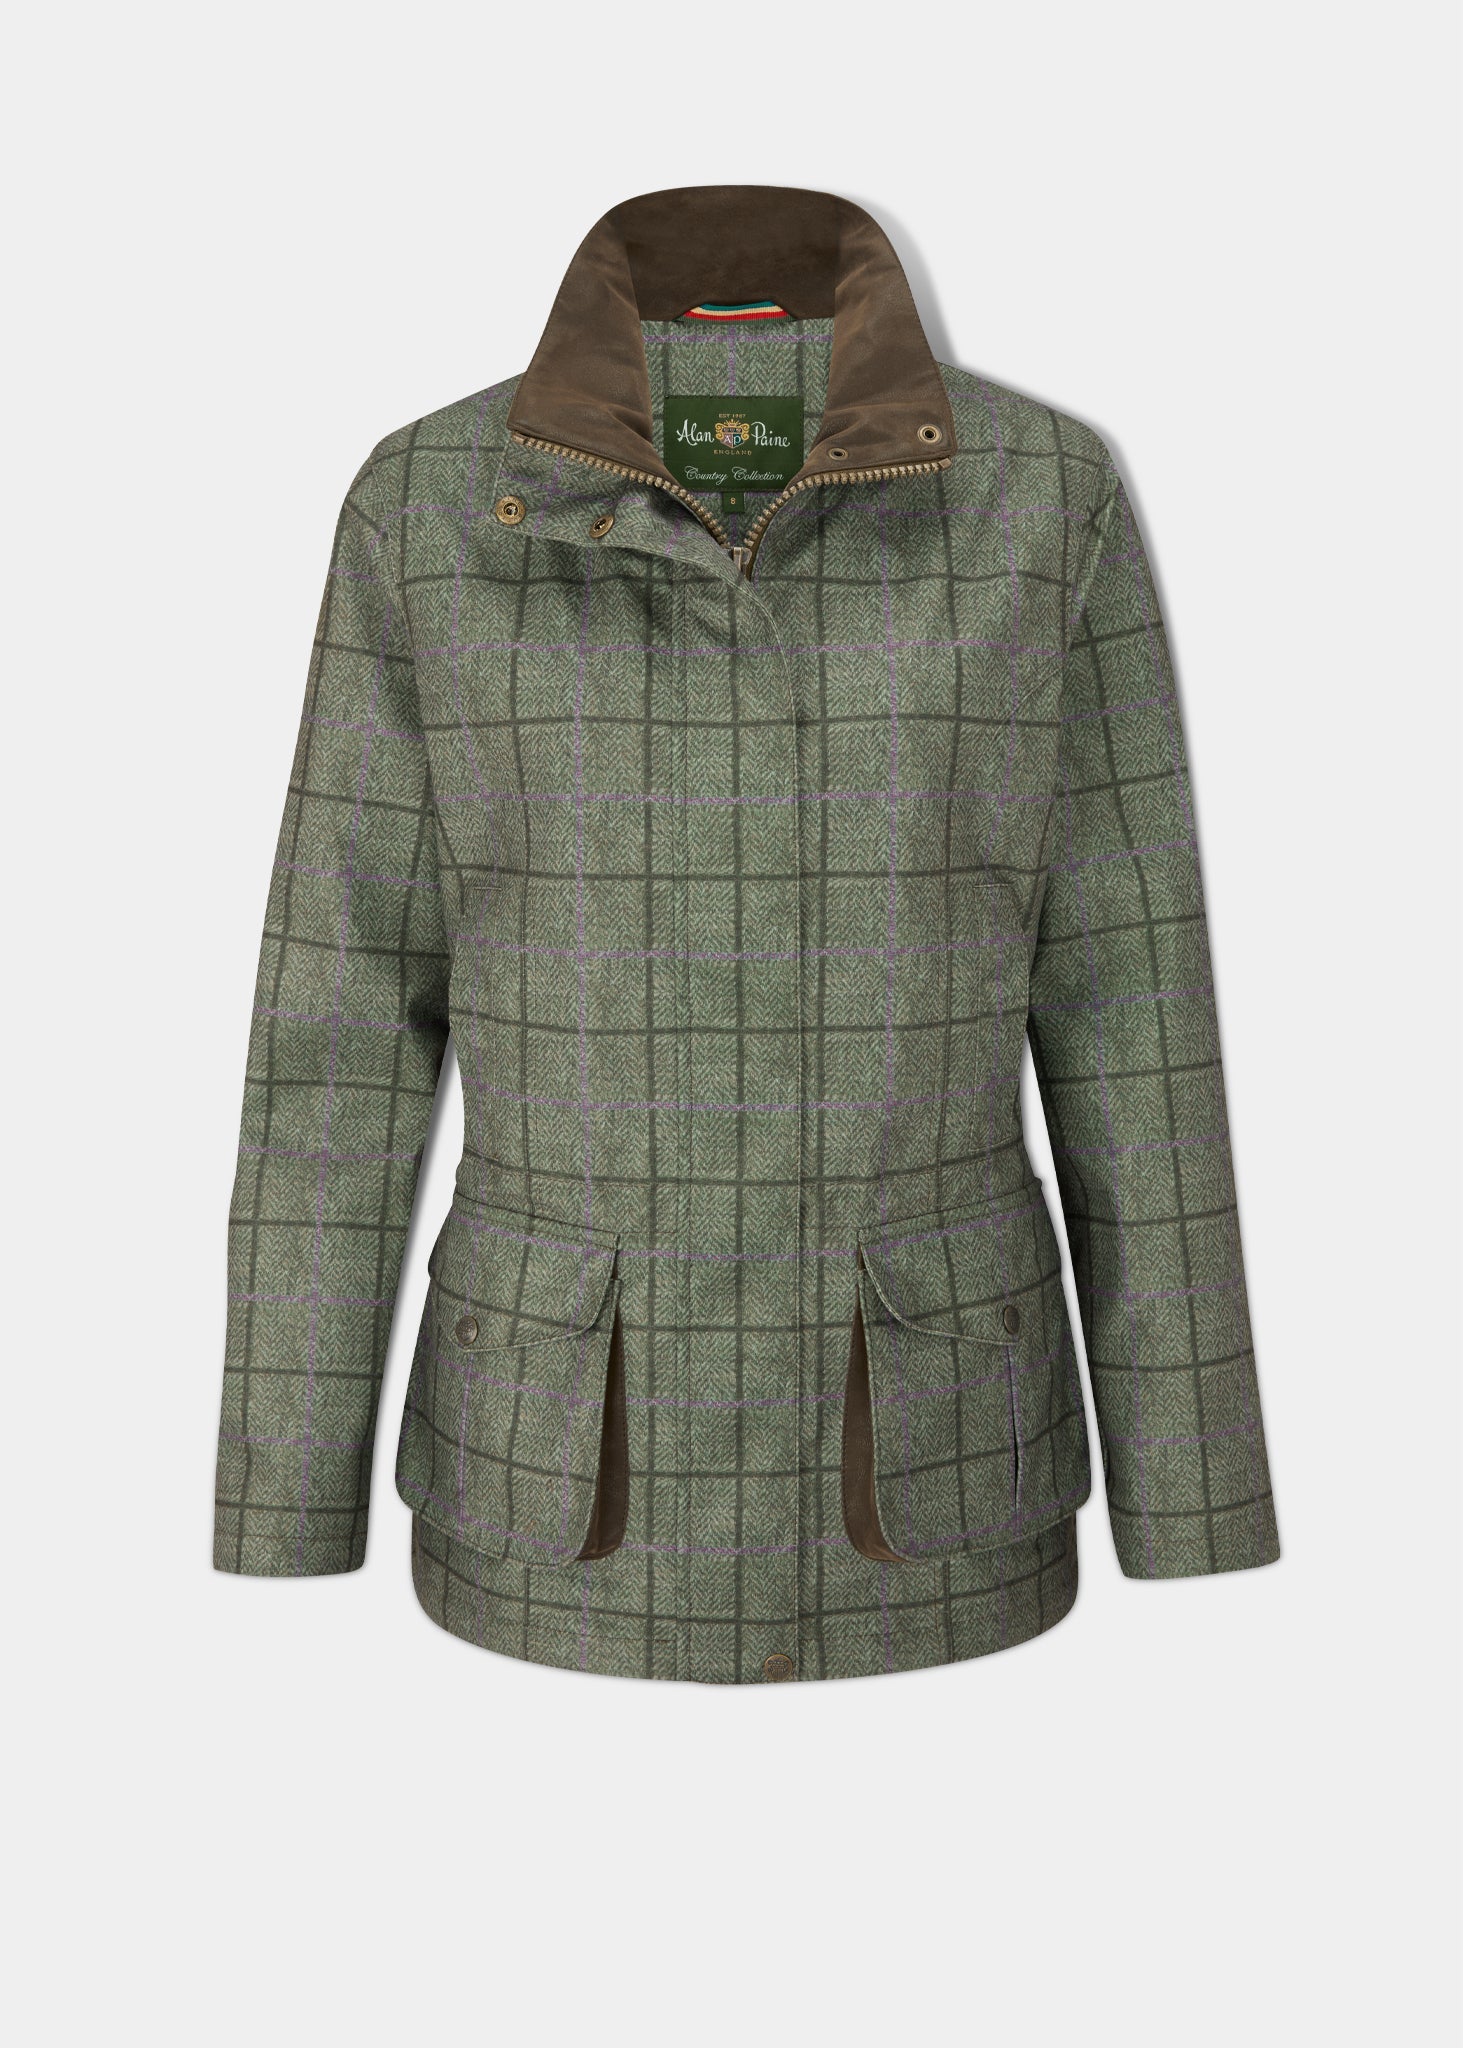 Ladies Tweed Jackets and Coats  Women's Country Tweed Jackets and Coats